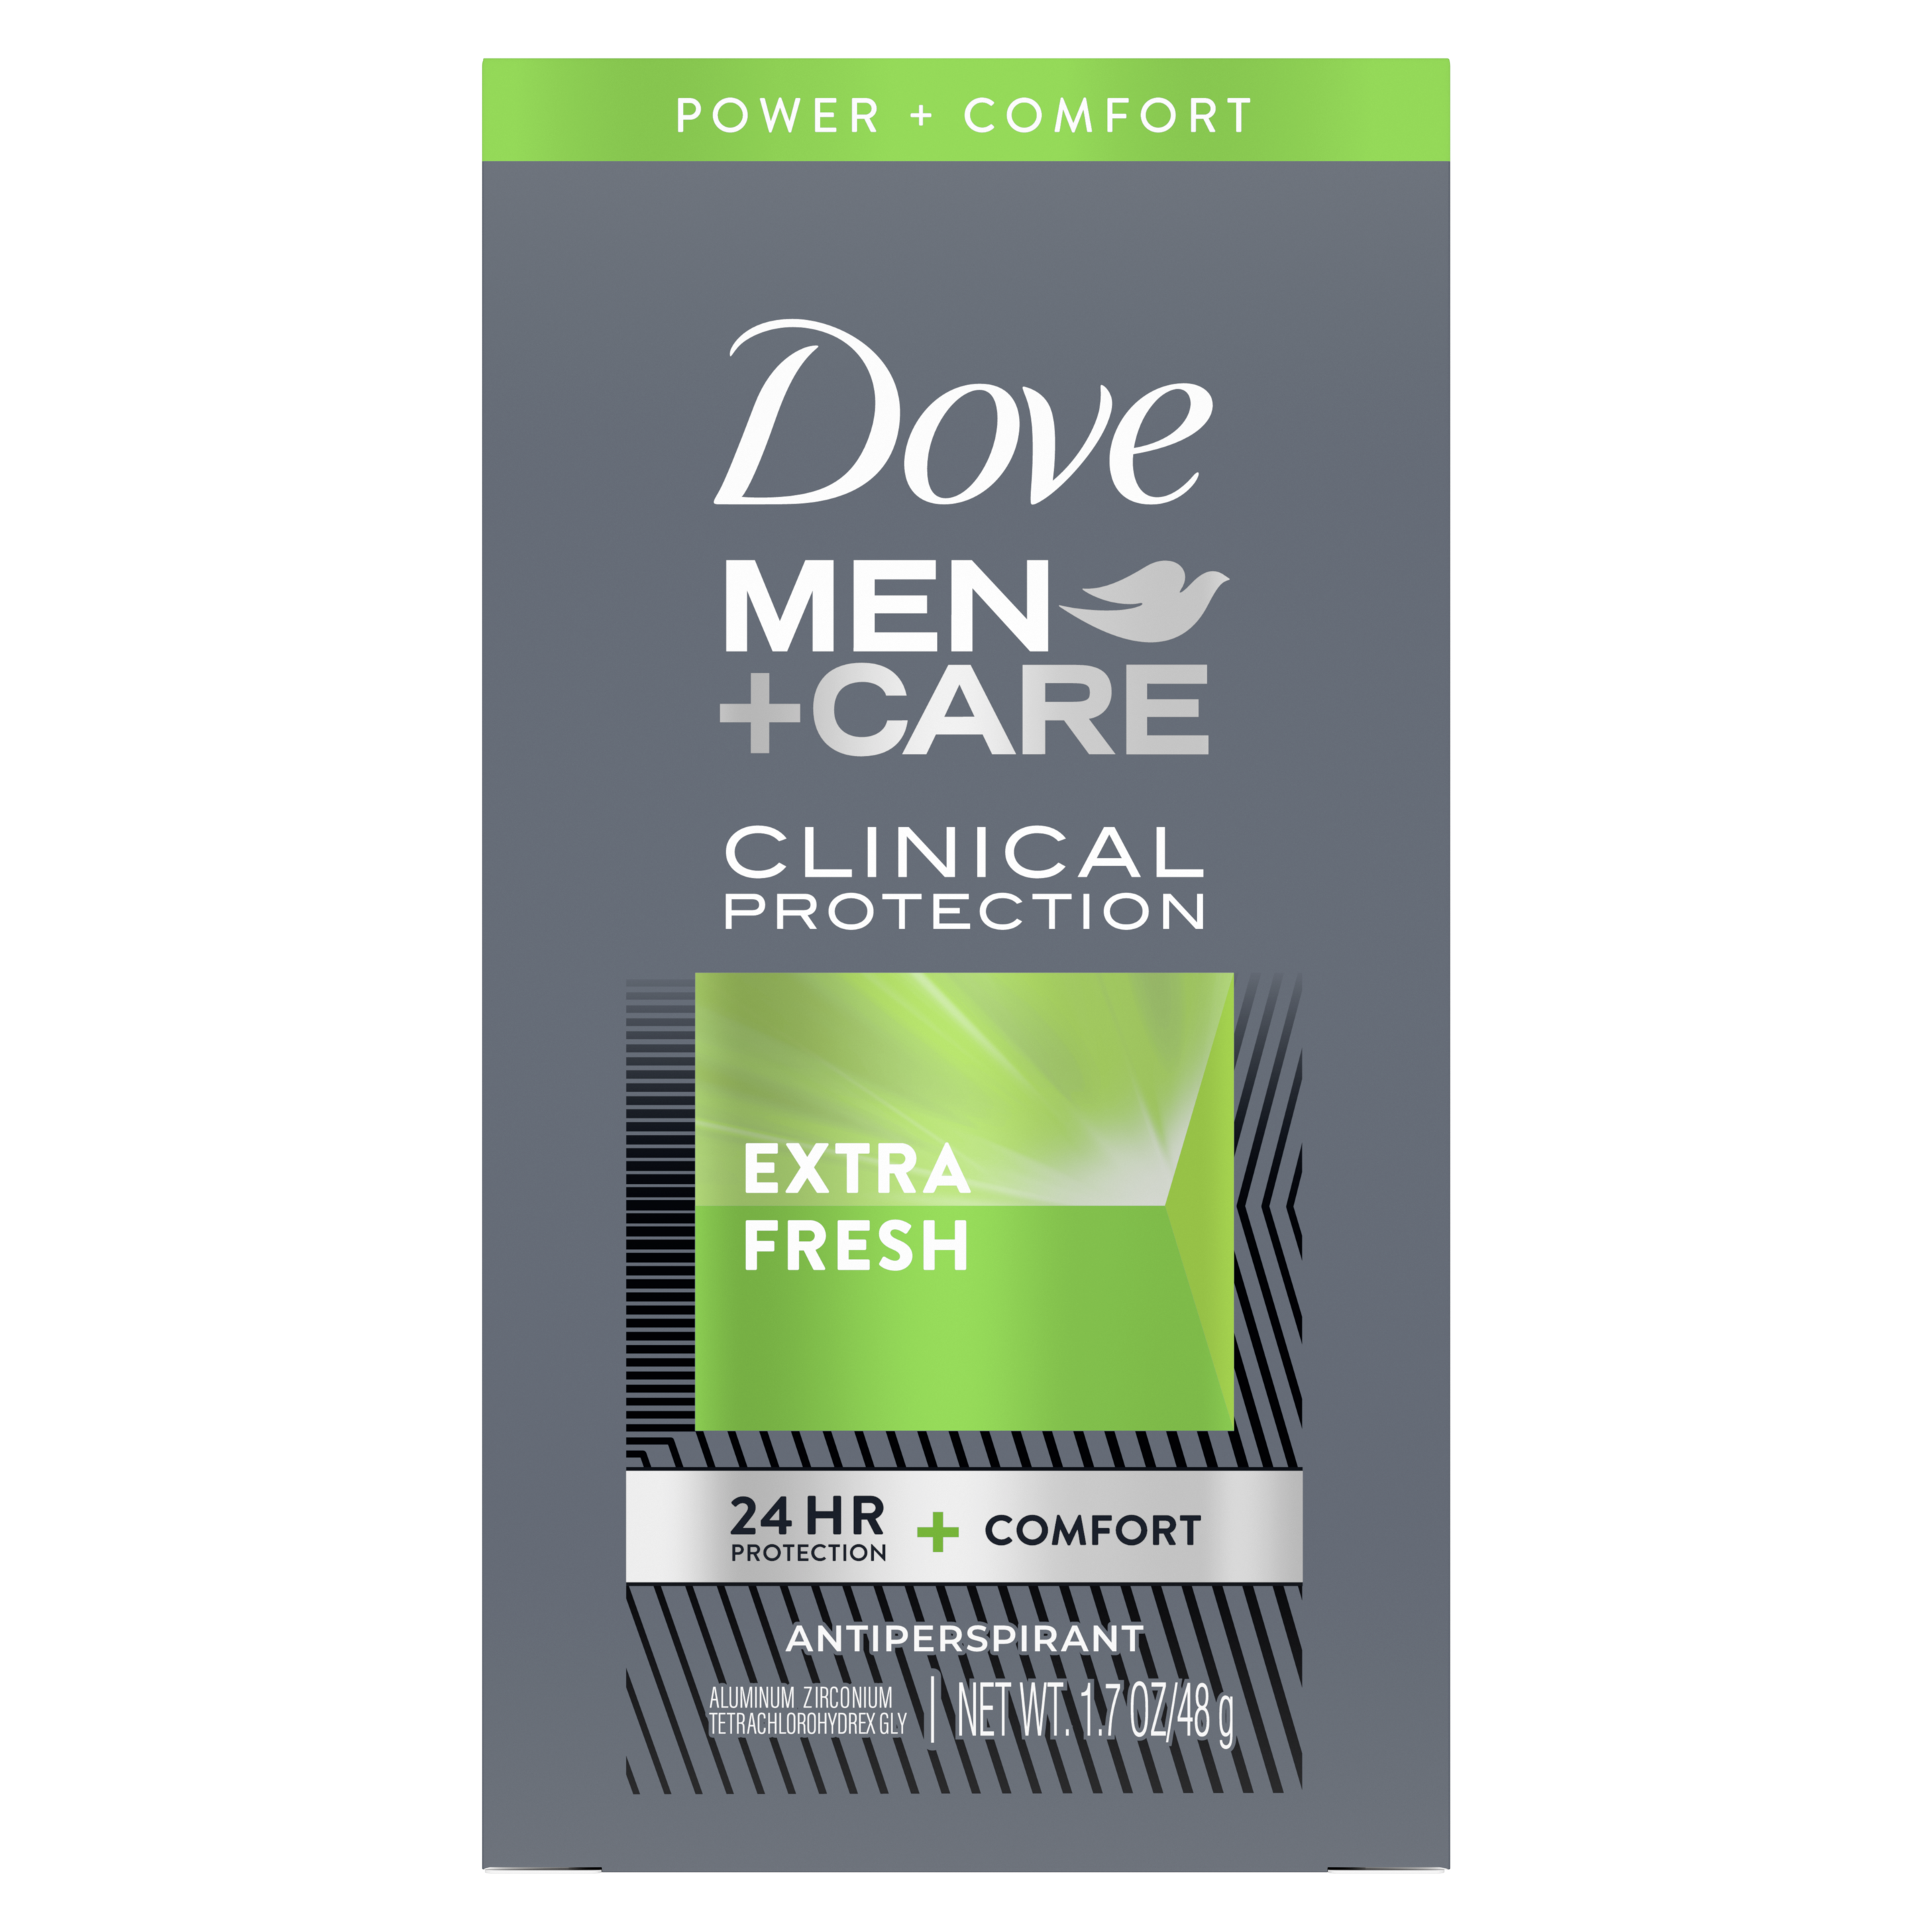 Dove Men+Care Extra Fresh Clinical Protection Antiperspirant 1.7 oz